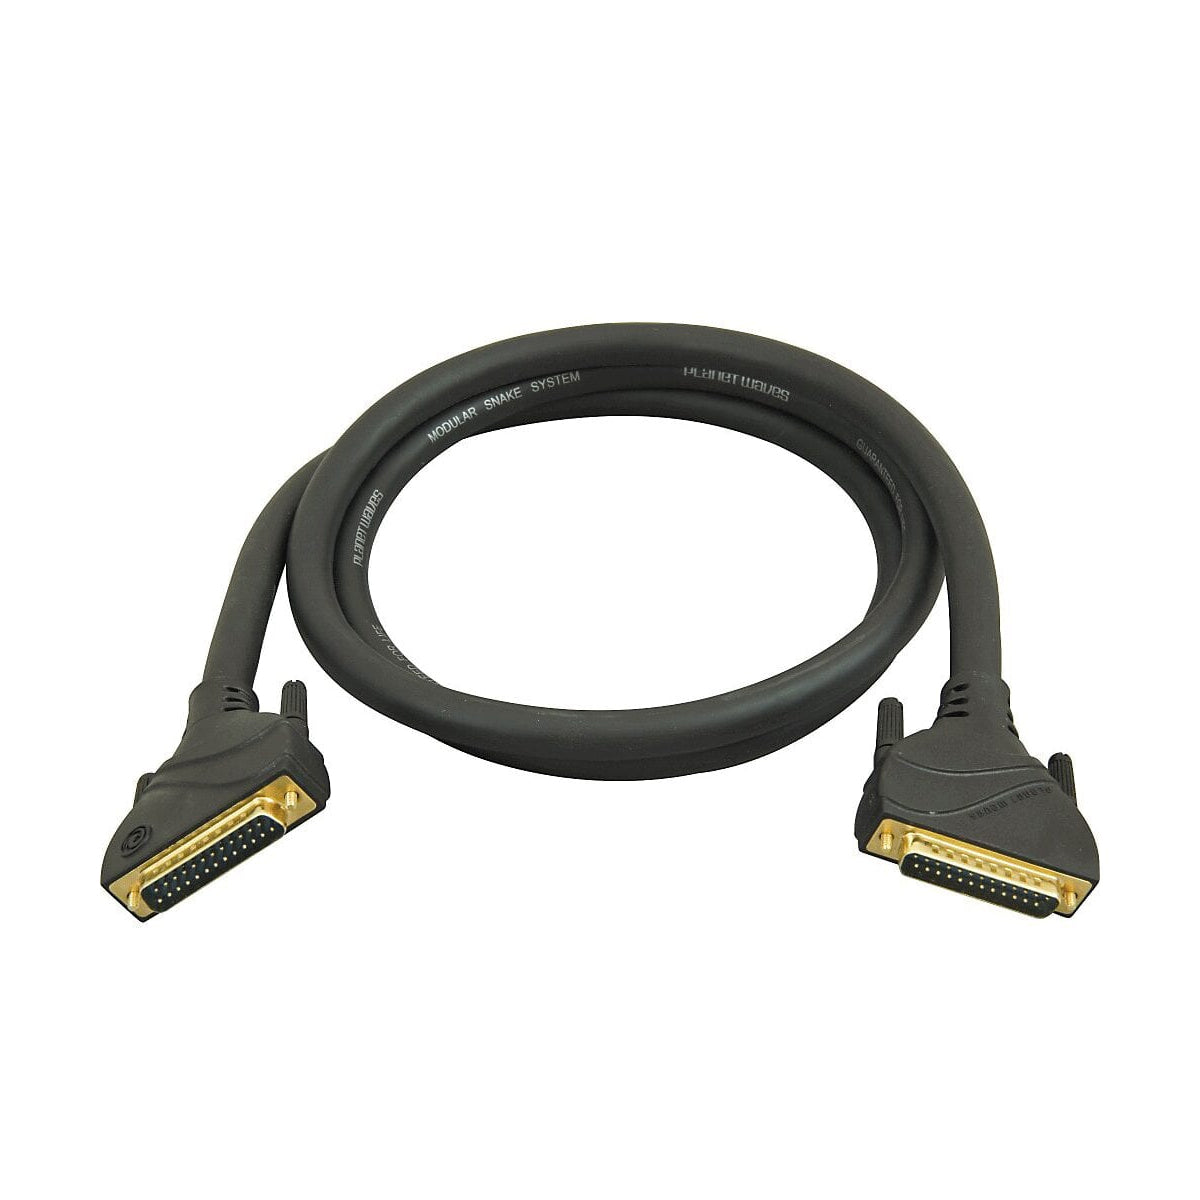 Planetwaves PWDB25MM05 Modular Snake System 5ft Core Cable